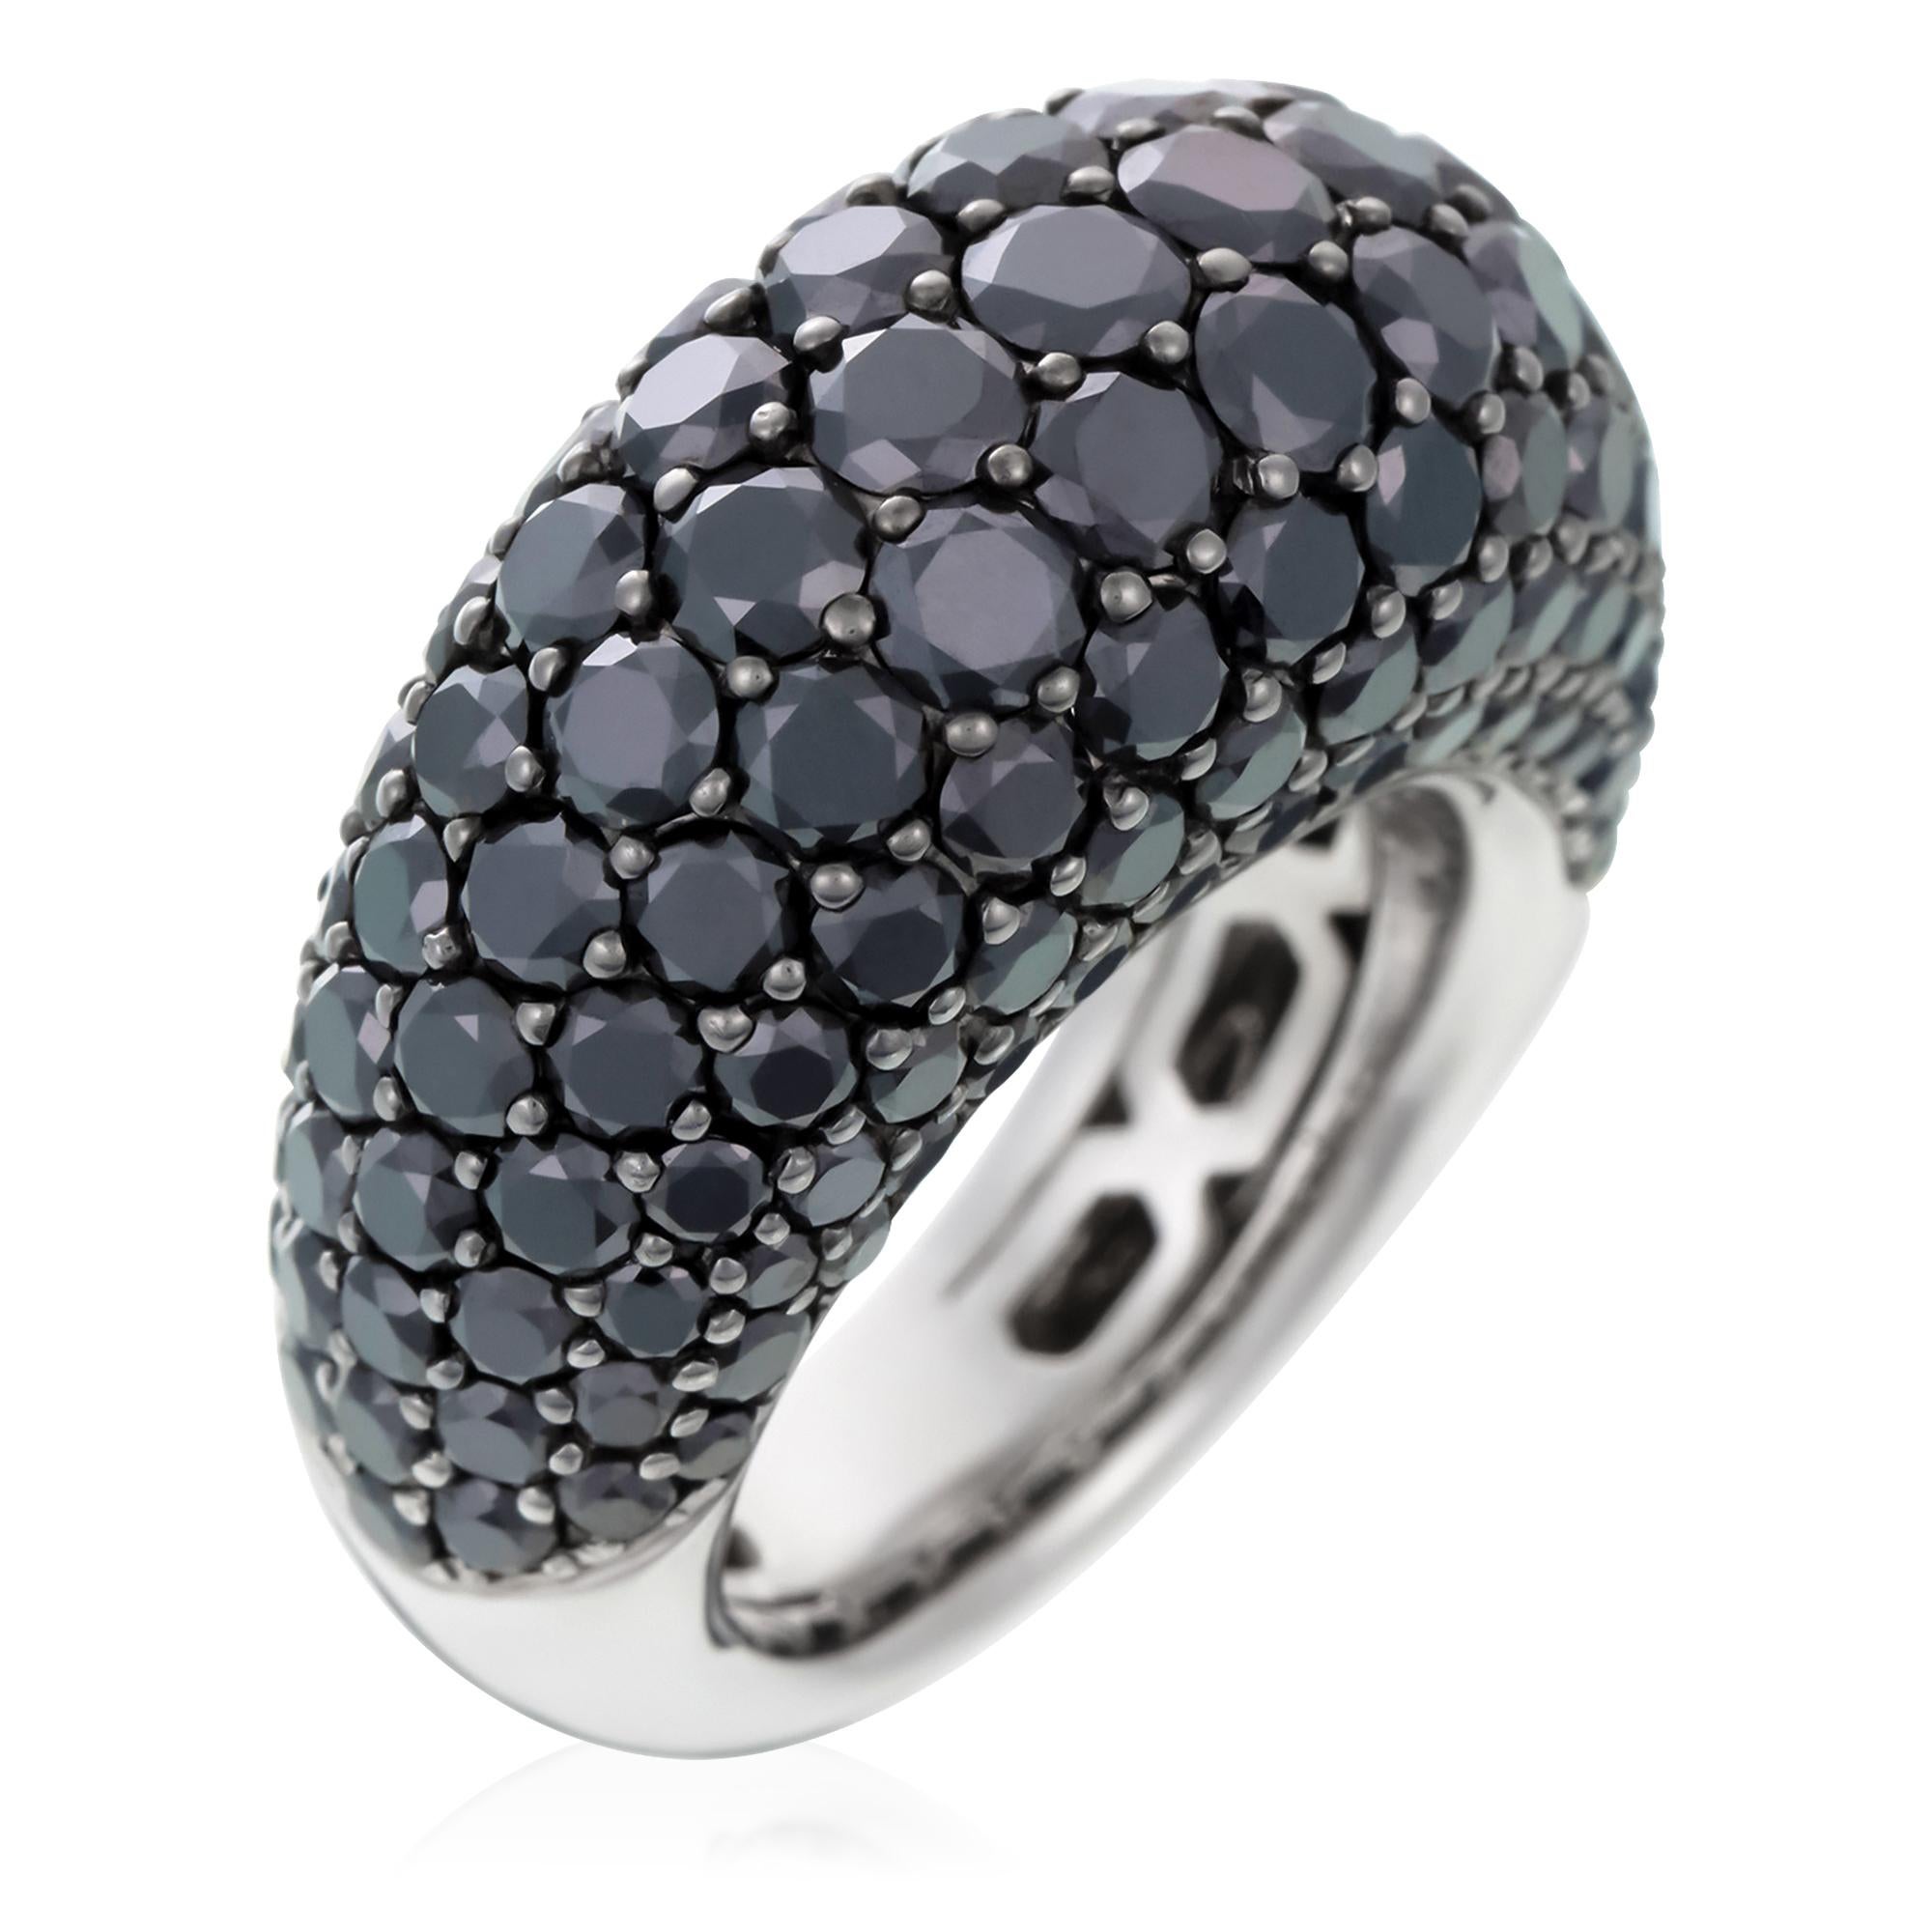 Give your jewellery collection a dramatic update with this unique black diamond ring from David Morris. The ring’s smooth, domed silhouette and minimalist, monochromatic palette nod to the House’s founding in ‘60s London and – as with many David